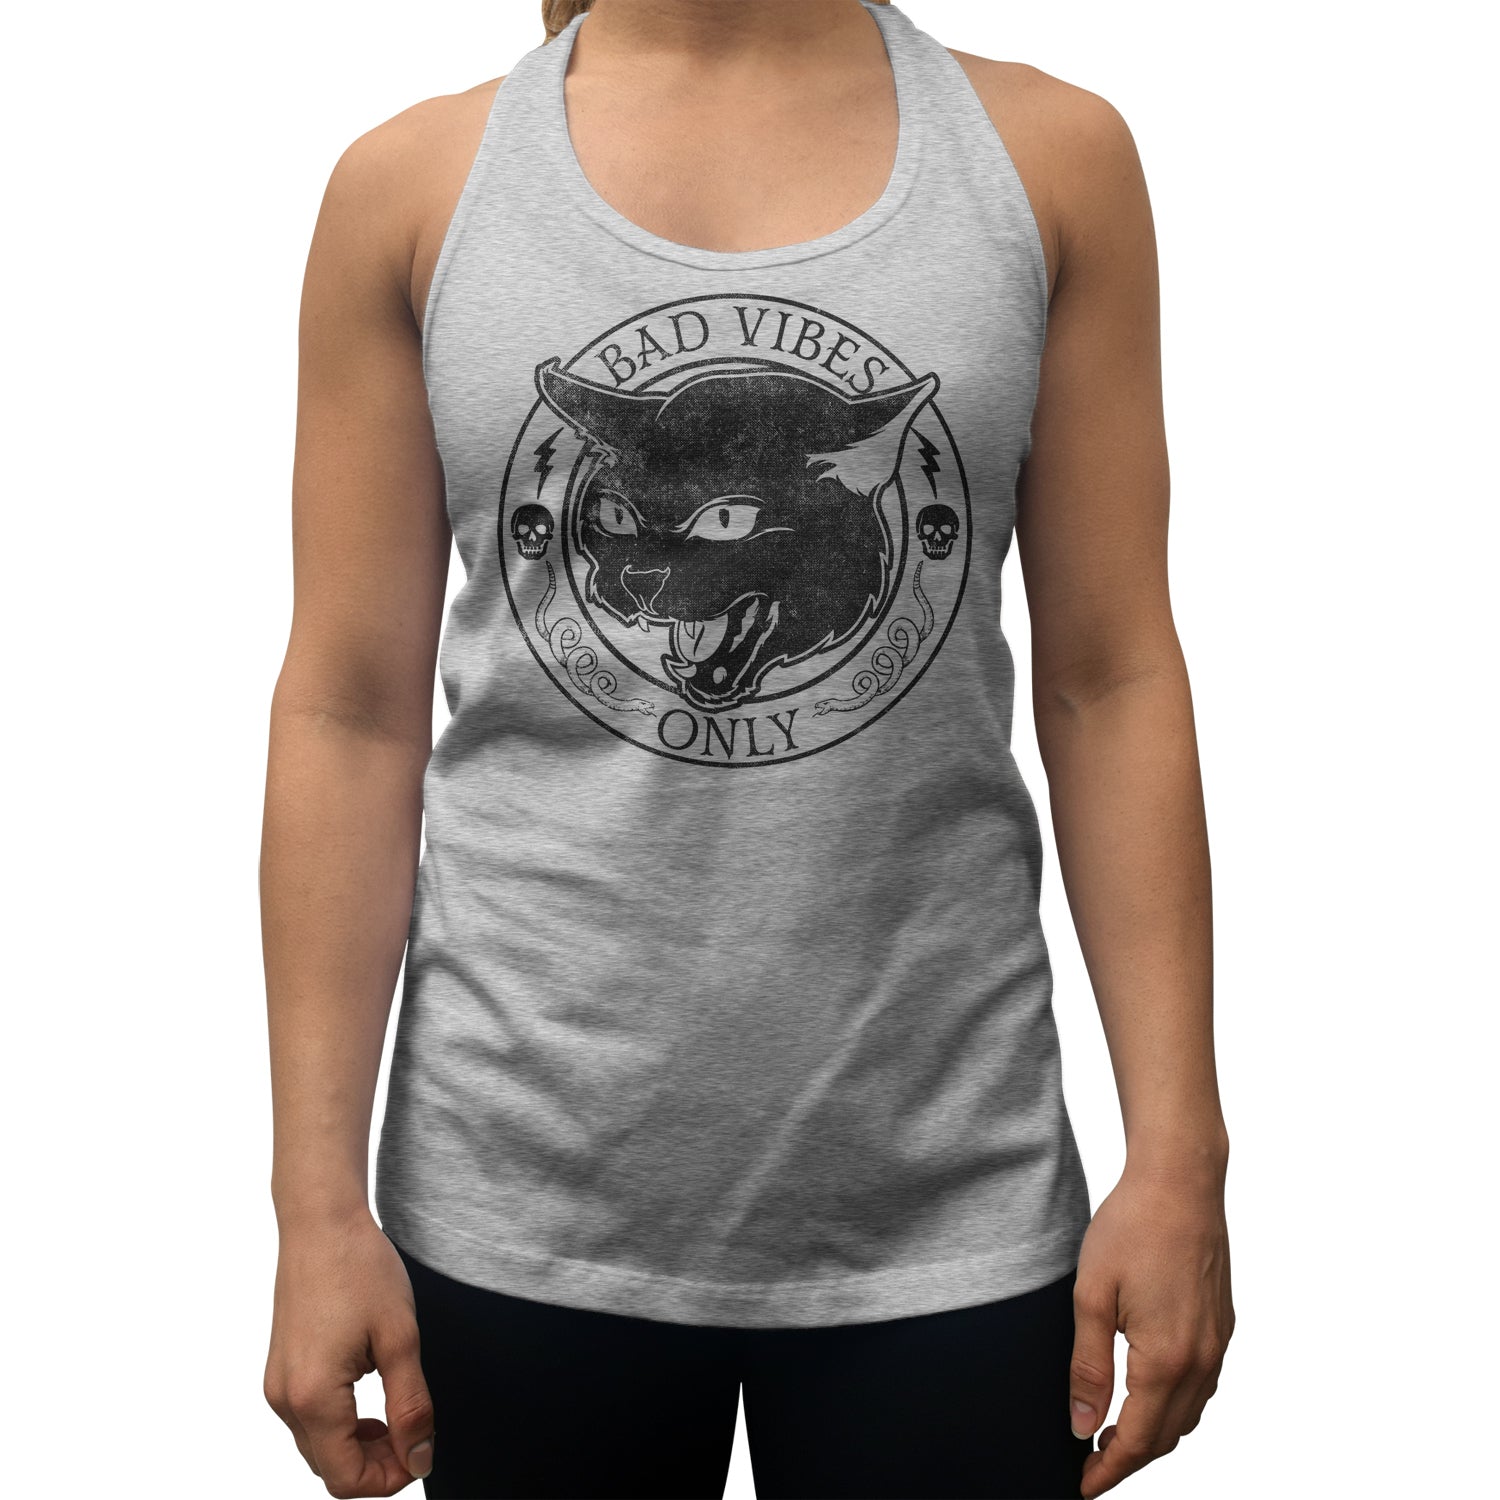 Women's Bad Vibes Only Racerback Tank Top